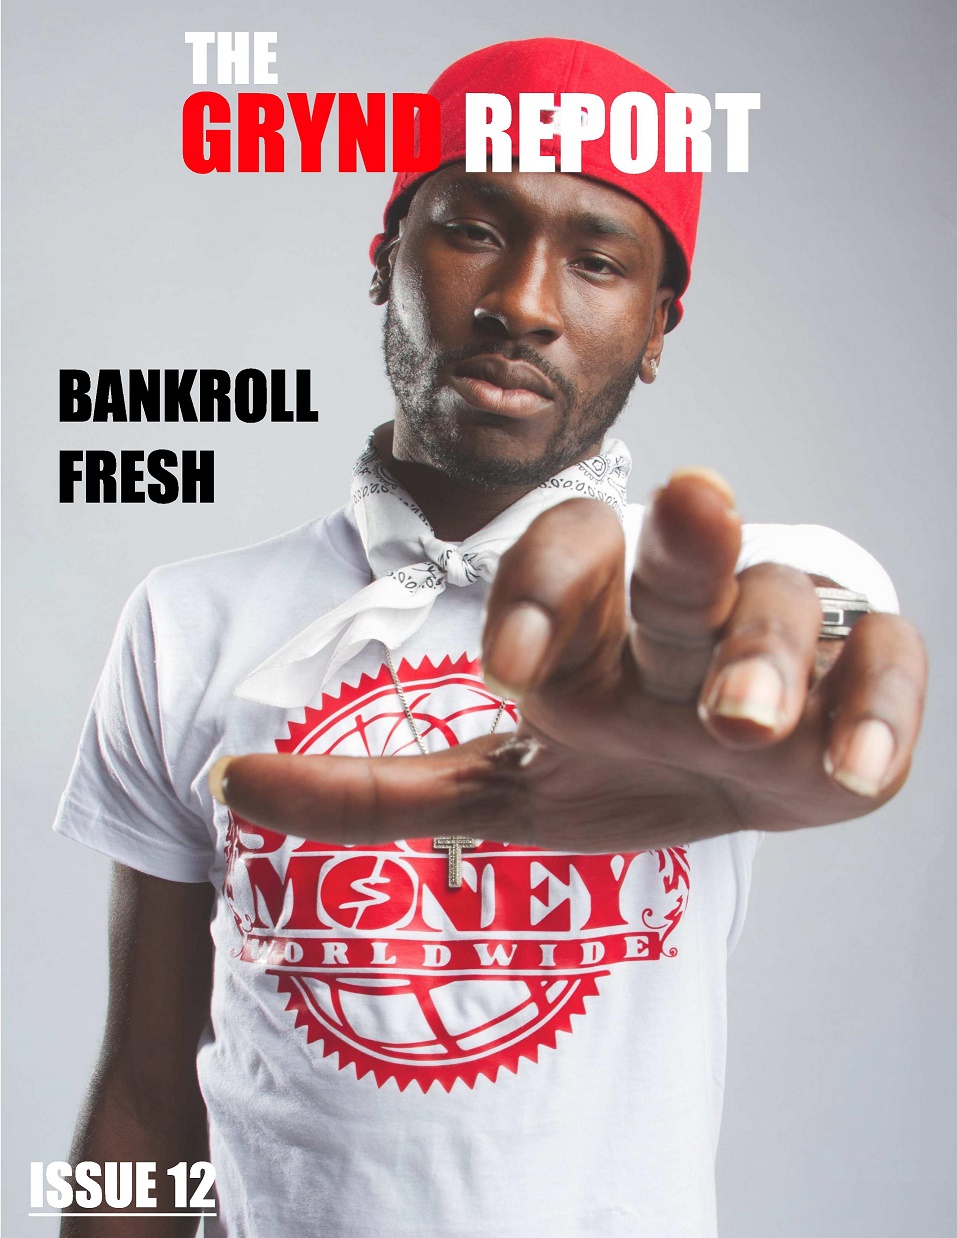 New Publication- The Grynd Report Issue 12 (Bankroll Fresh Edition)